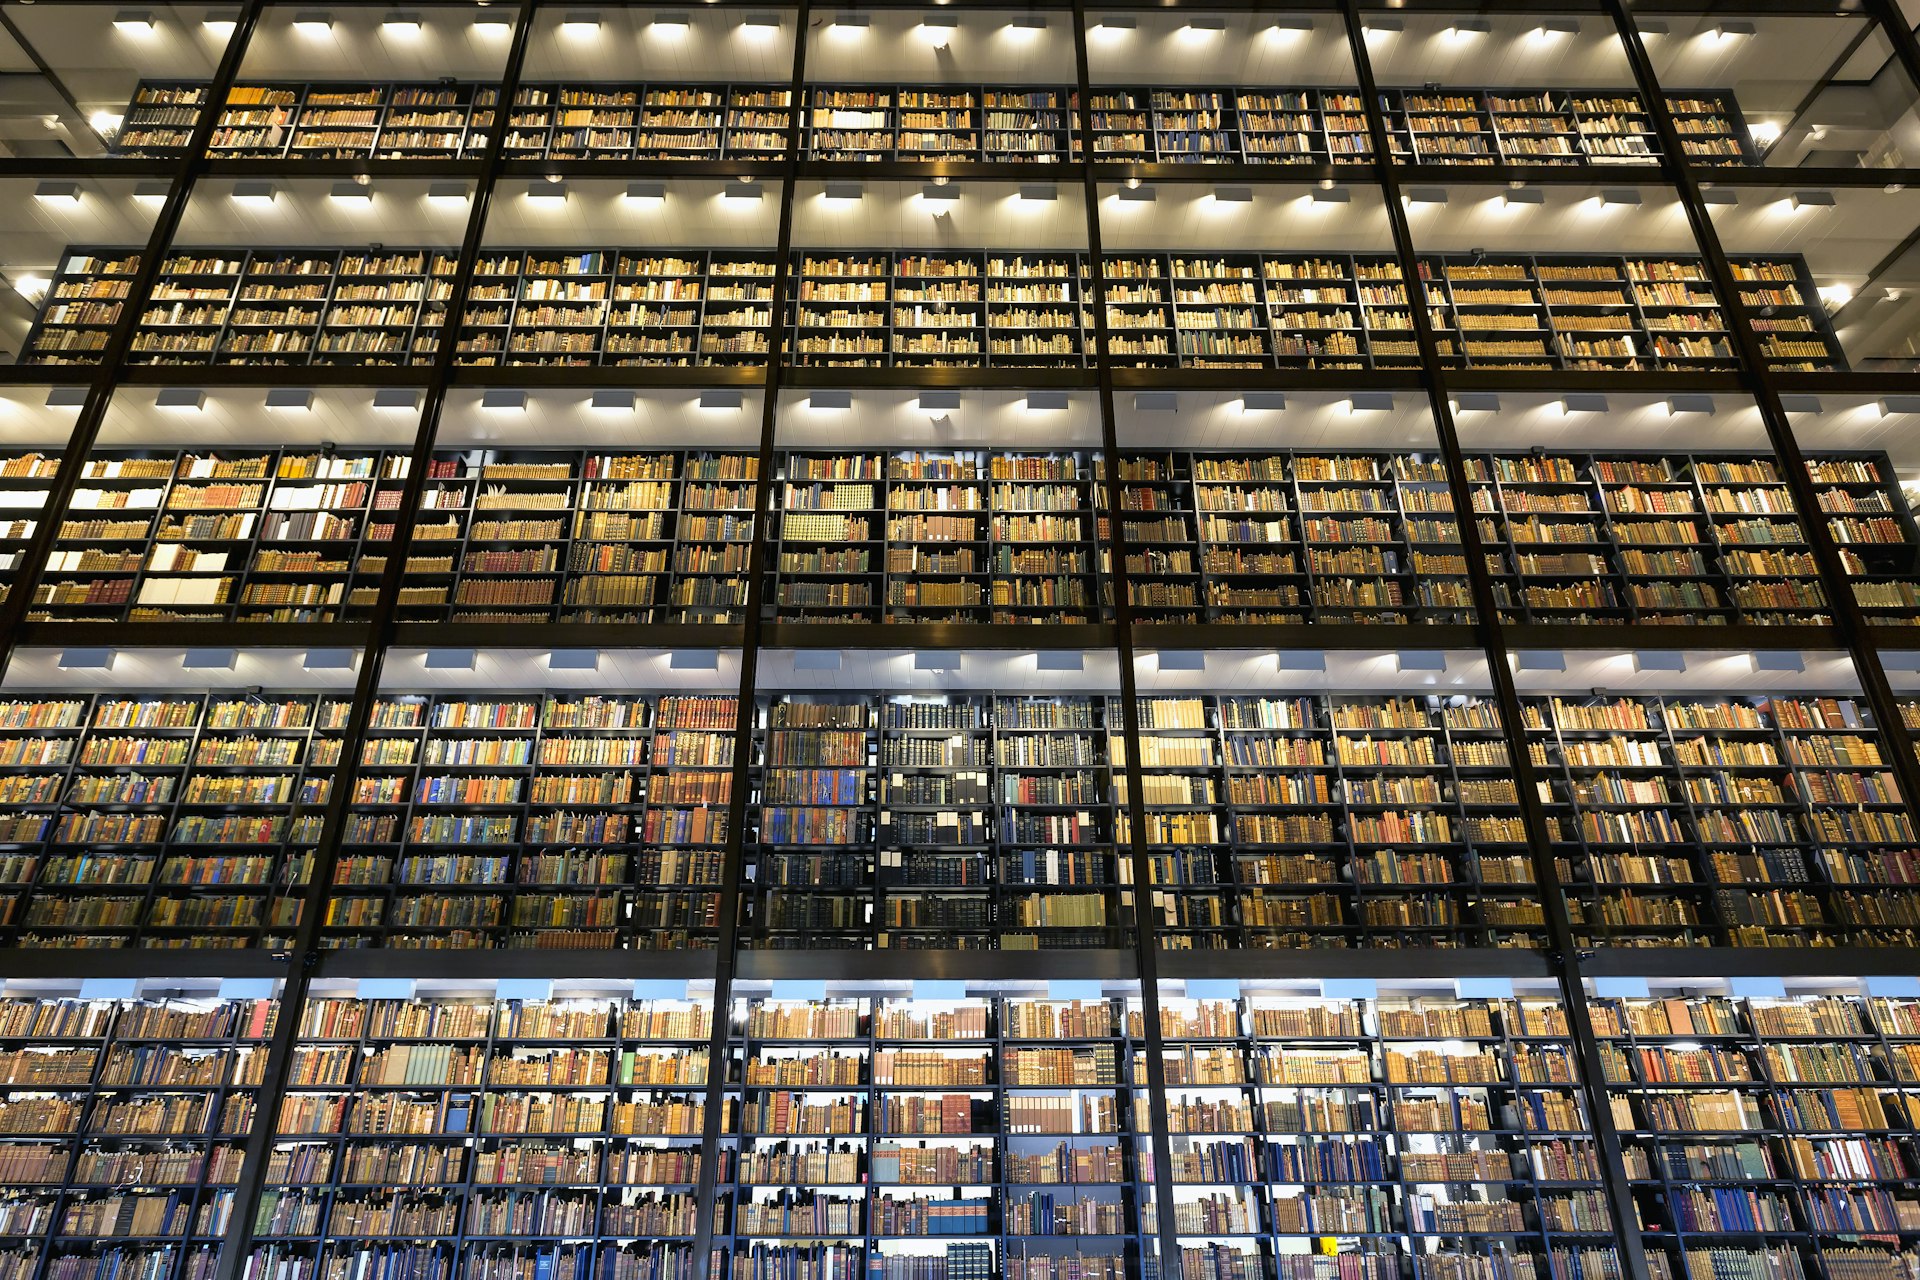 The “stacks” of Beinecke Rare Book & Manuscript Library contain priceless volumes, Yale University, New Haven, Connecticut, USA